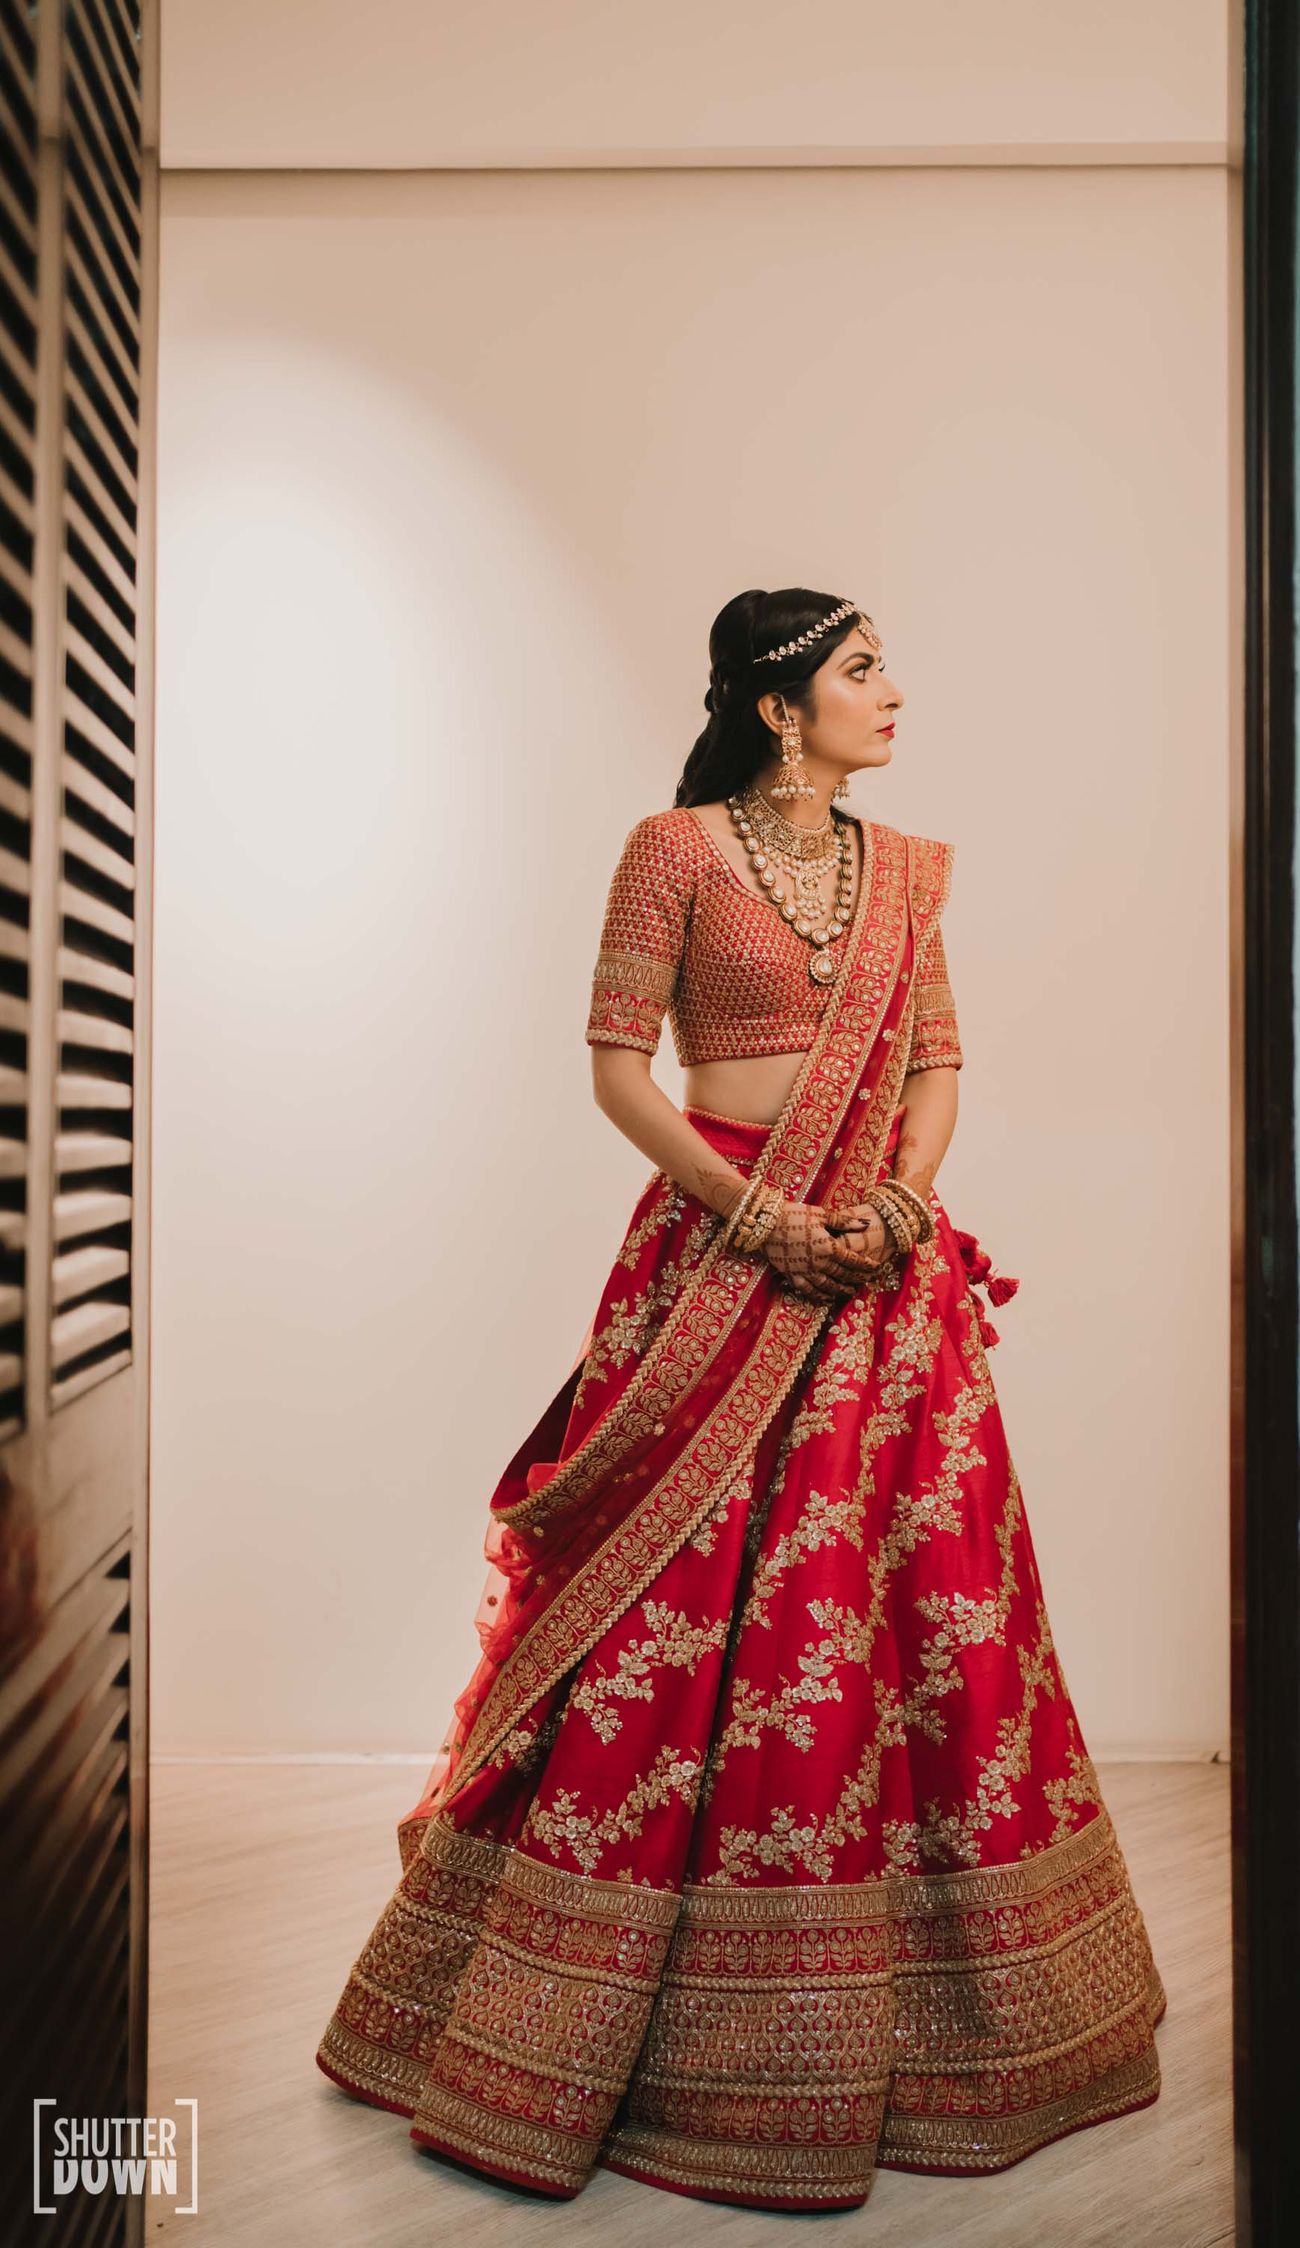 A Gorgeous Delhi Wedding With No Traditional Customs | WedMeGood